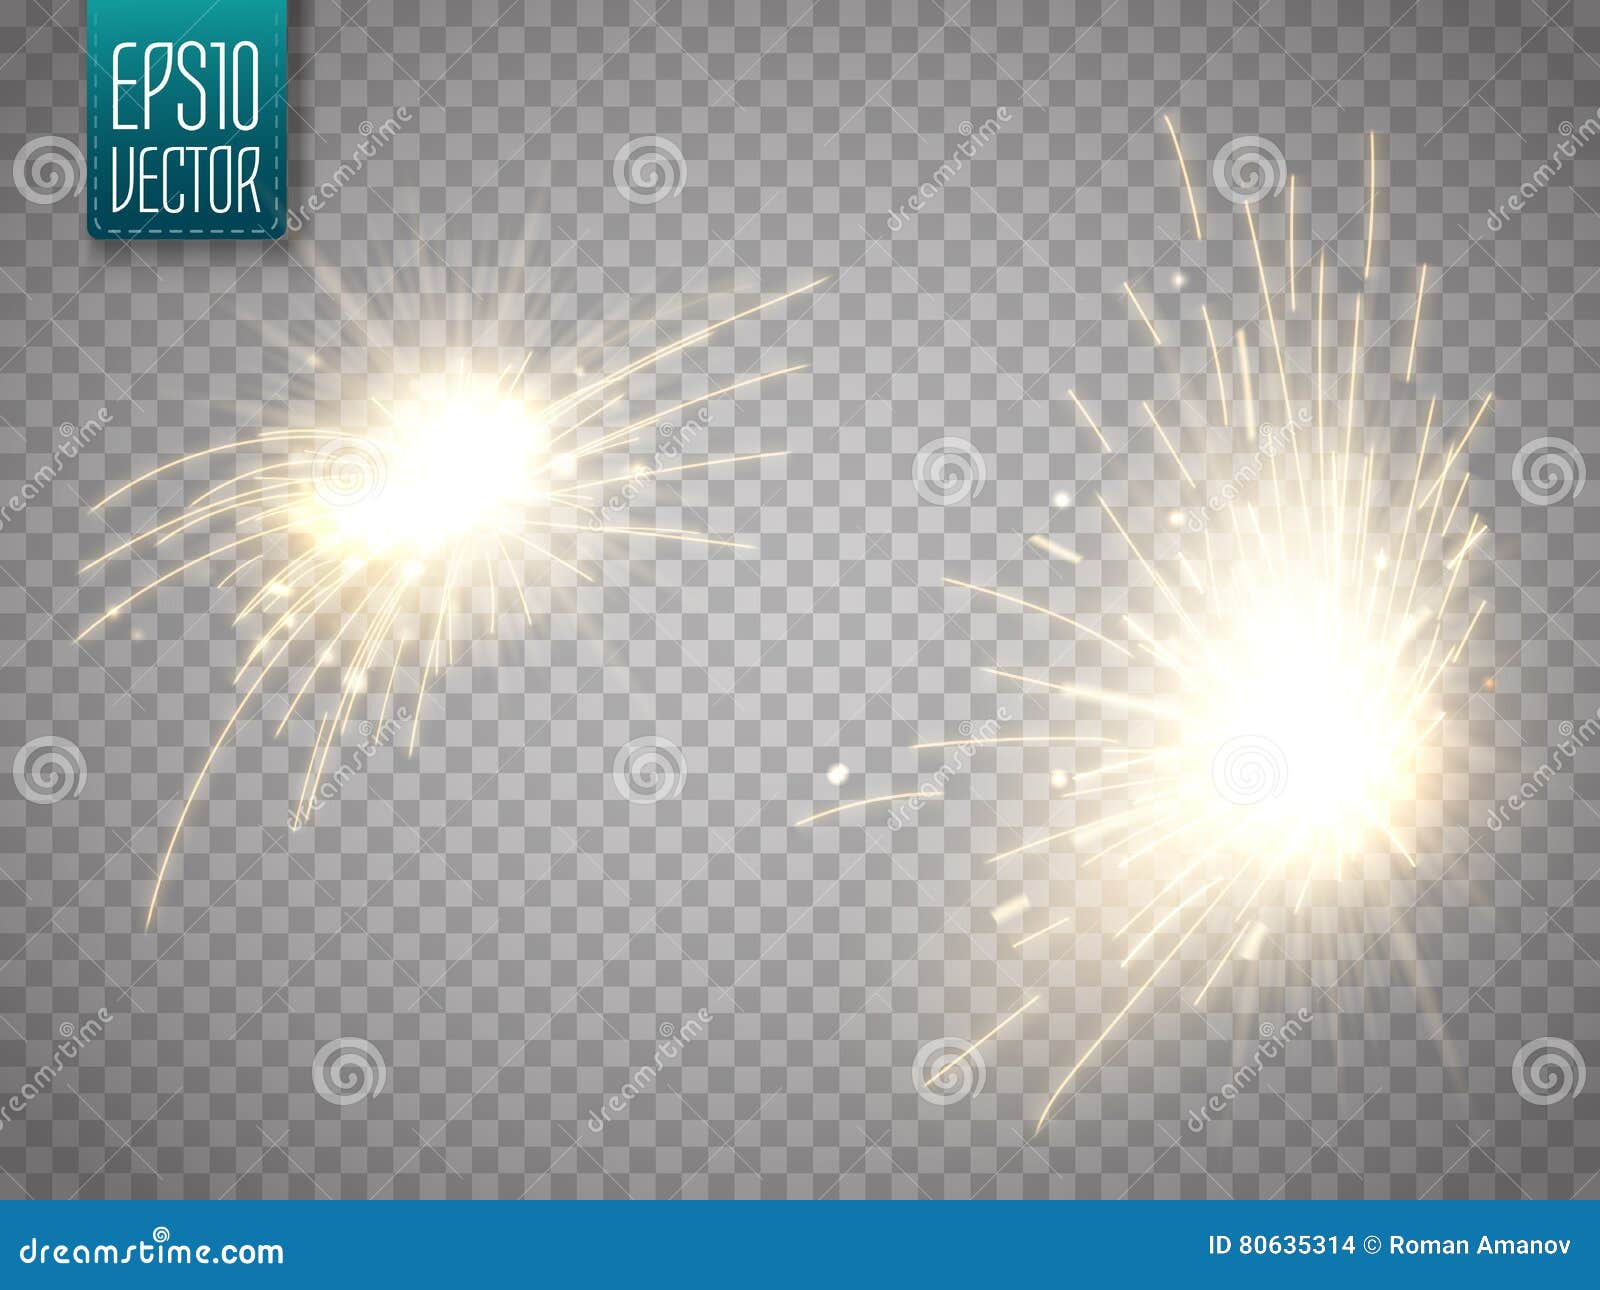 set of metal welding with sparks or sparklers 